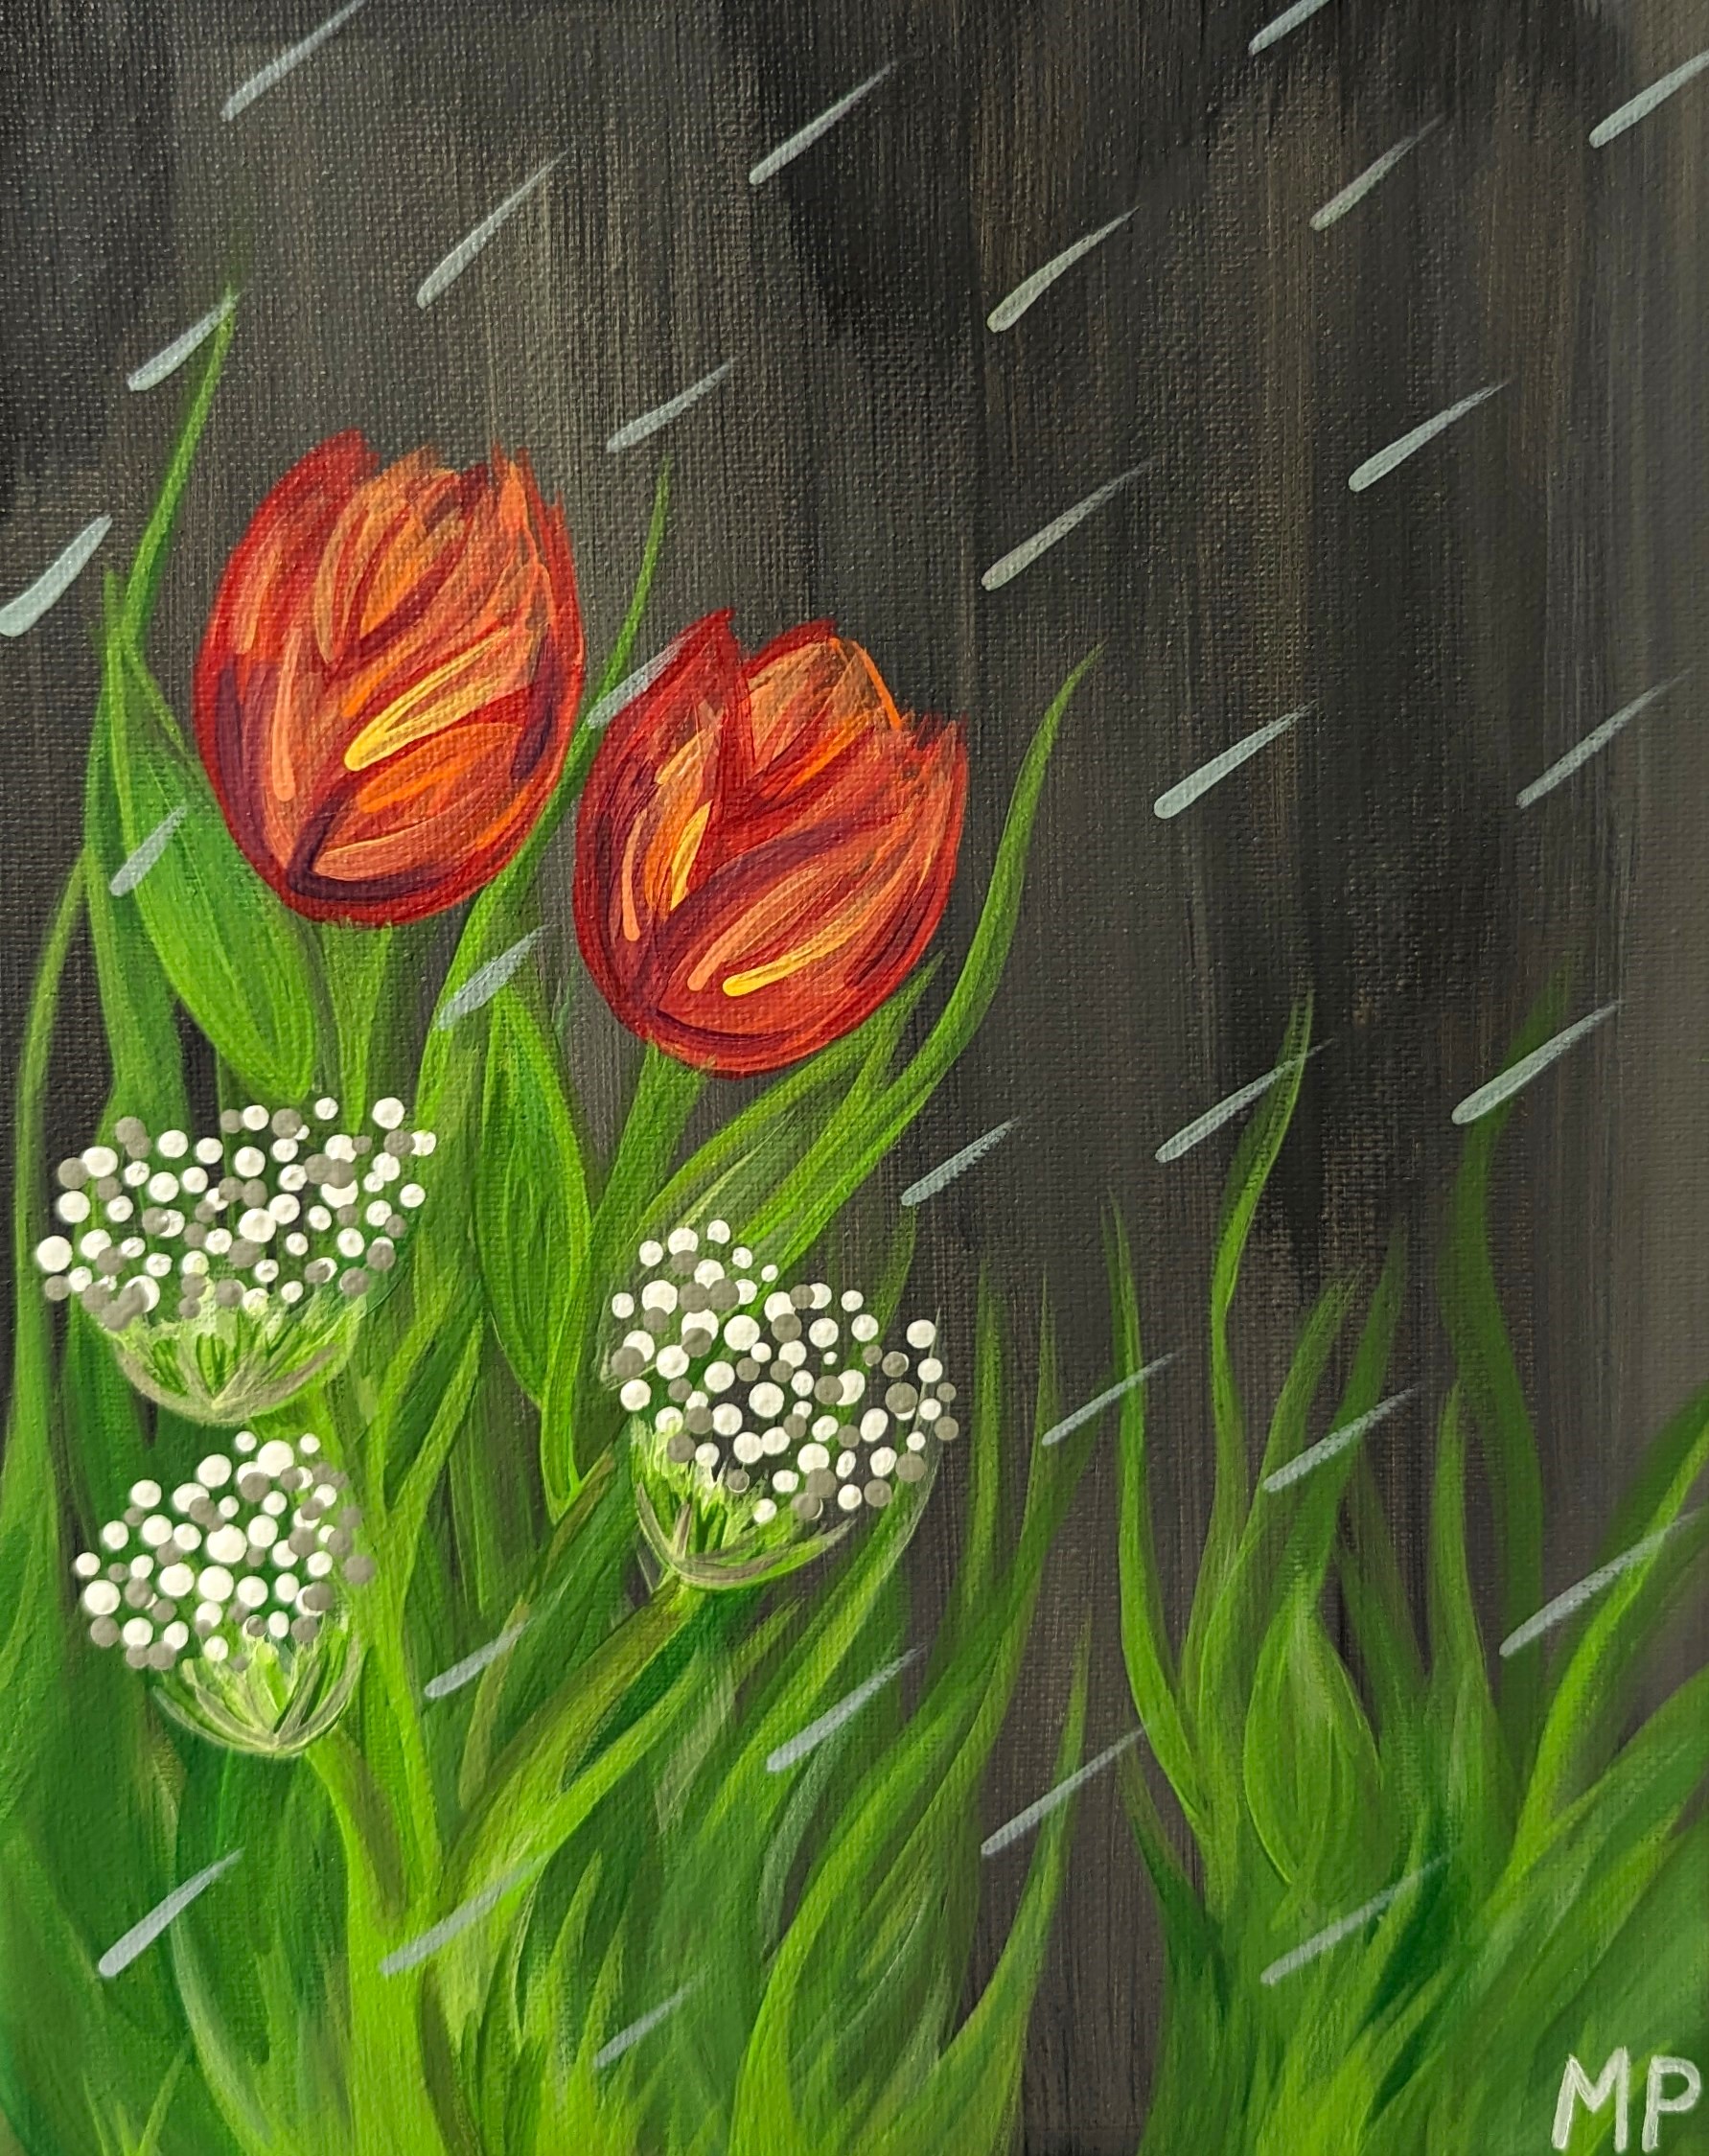 Rainy spring day with gray background and white and red flowers.